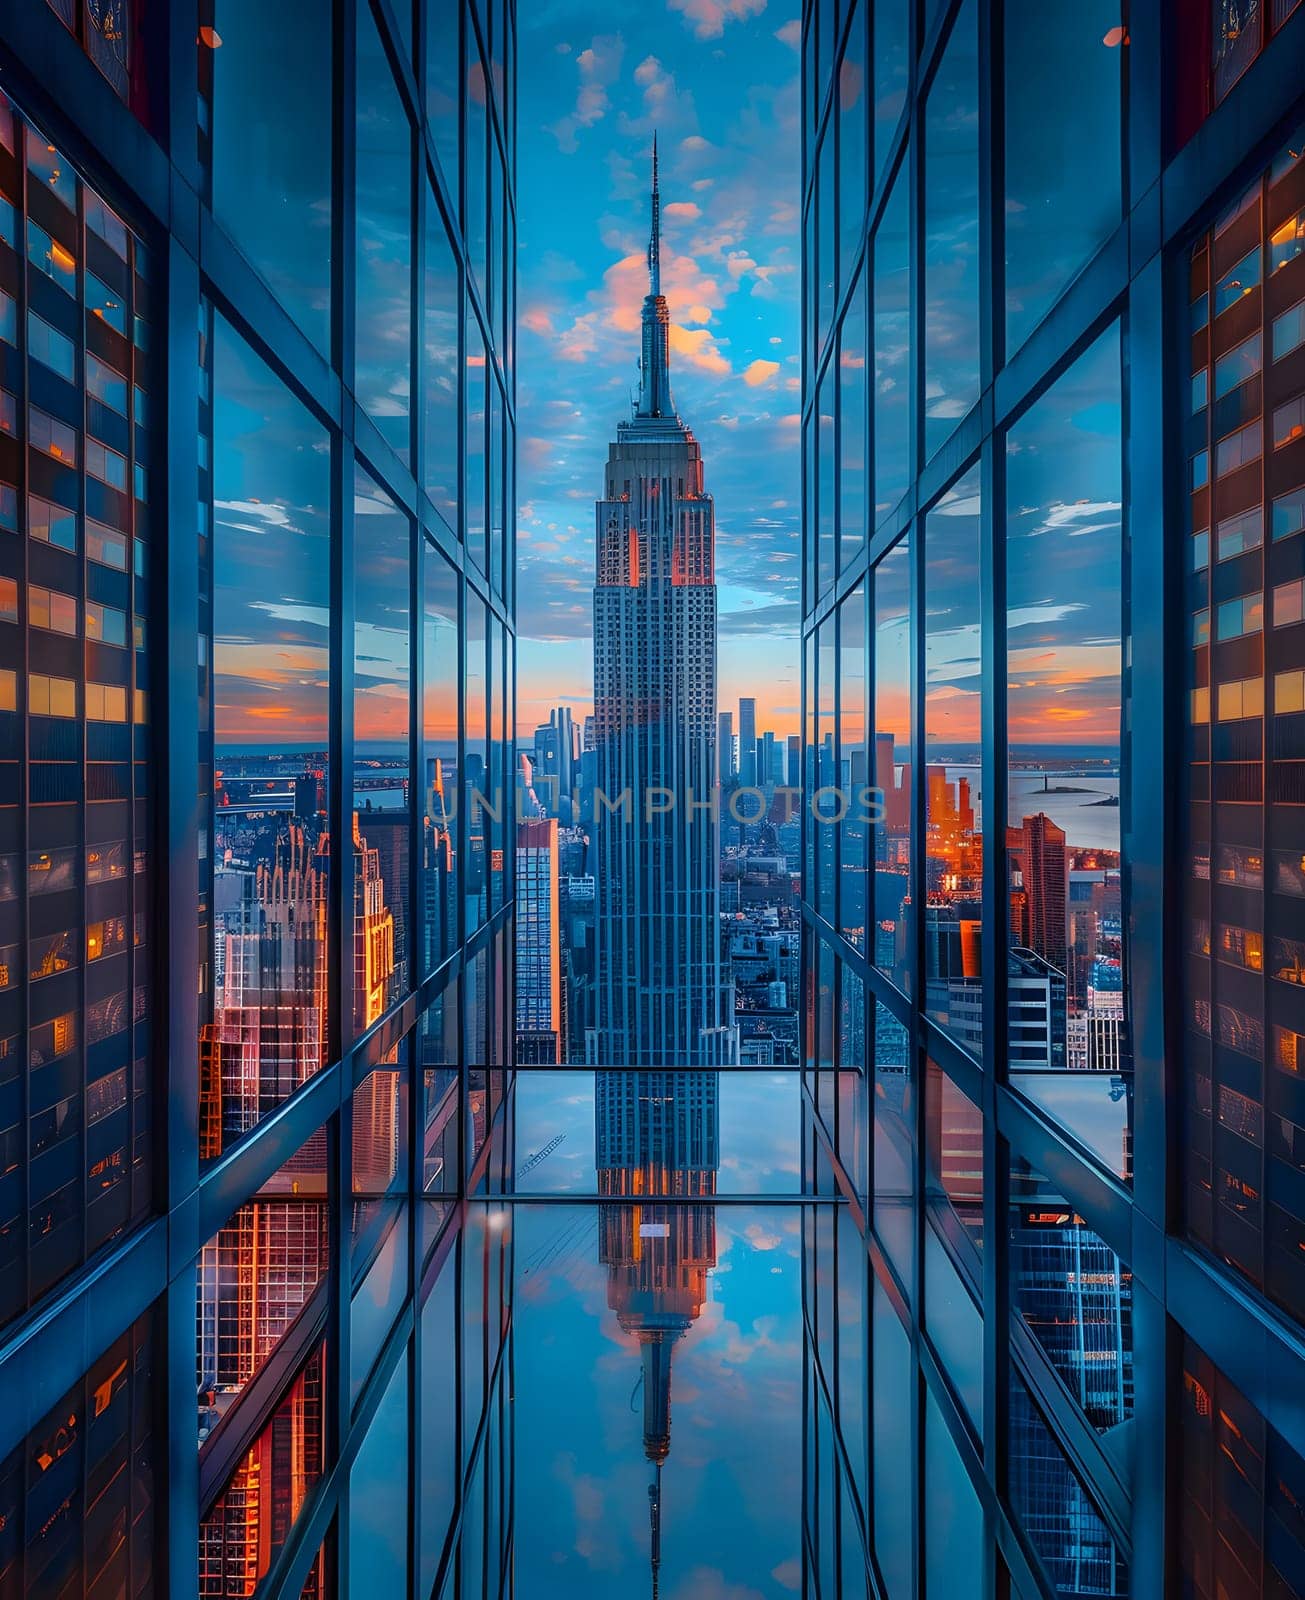 Empire State Building reflected in buildings windows against azure sky by Nadtochiy